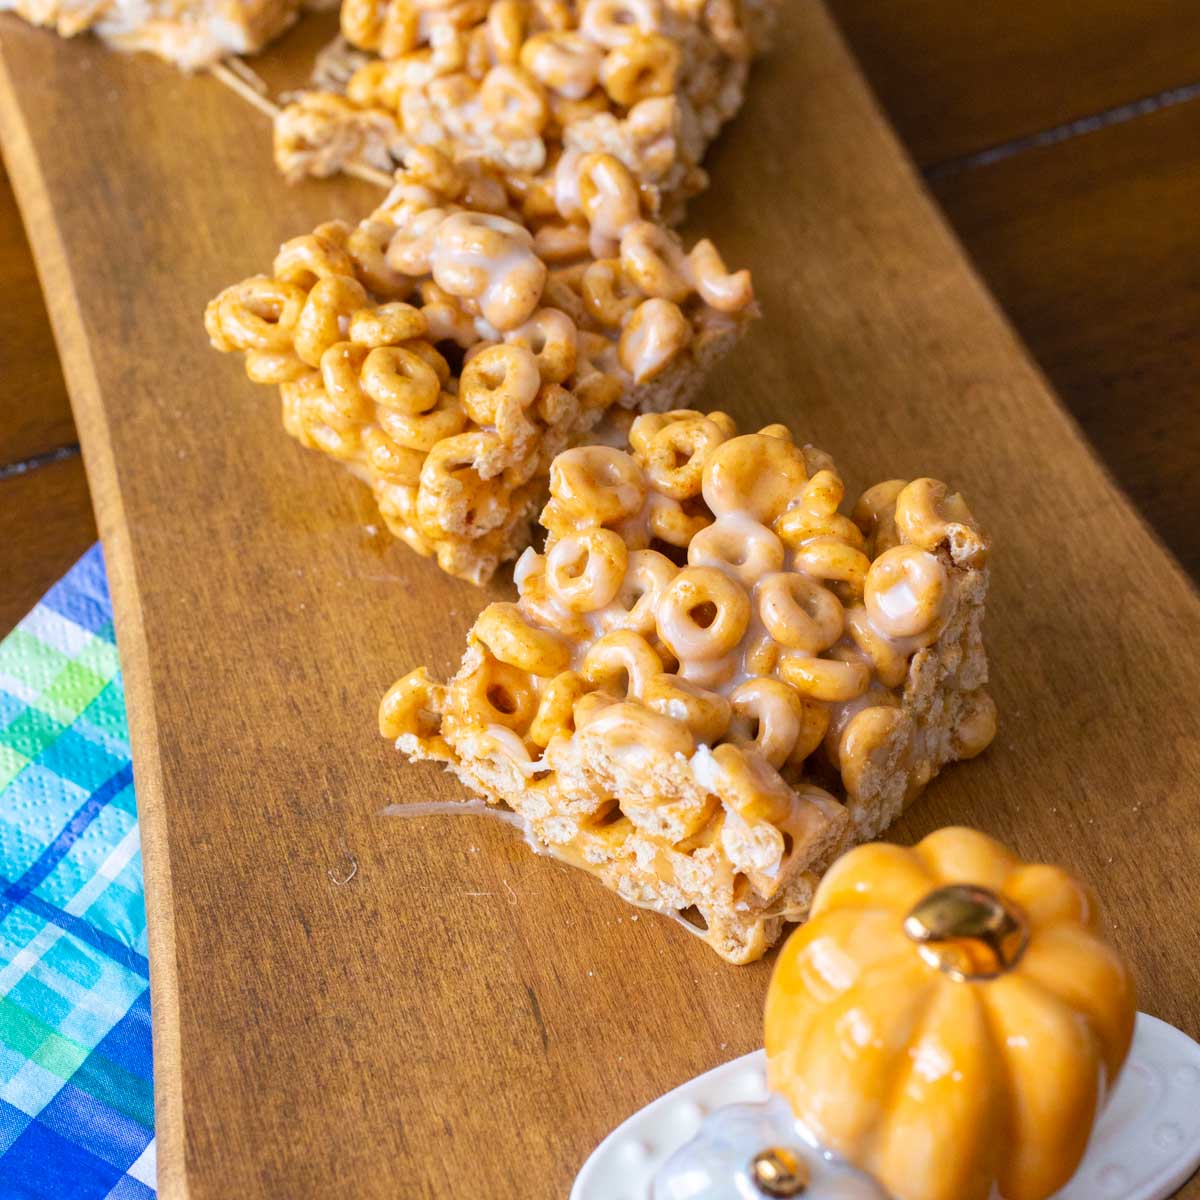 A wooden platter has 3 squares of pumpkin spice cheerio bars with a ceramic pumpkin decoration.